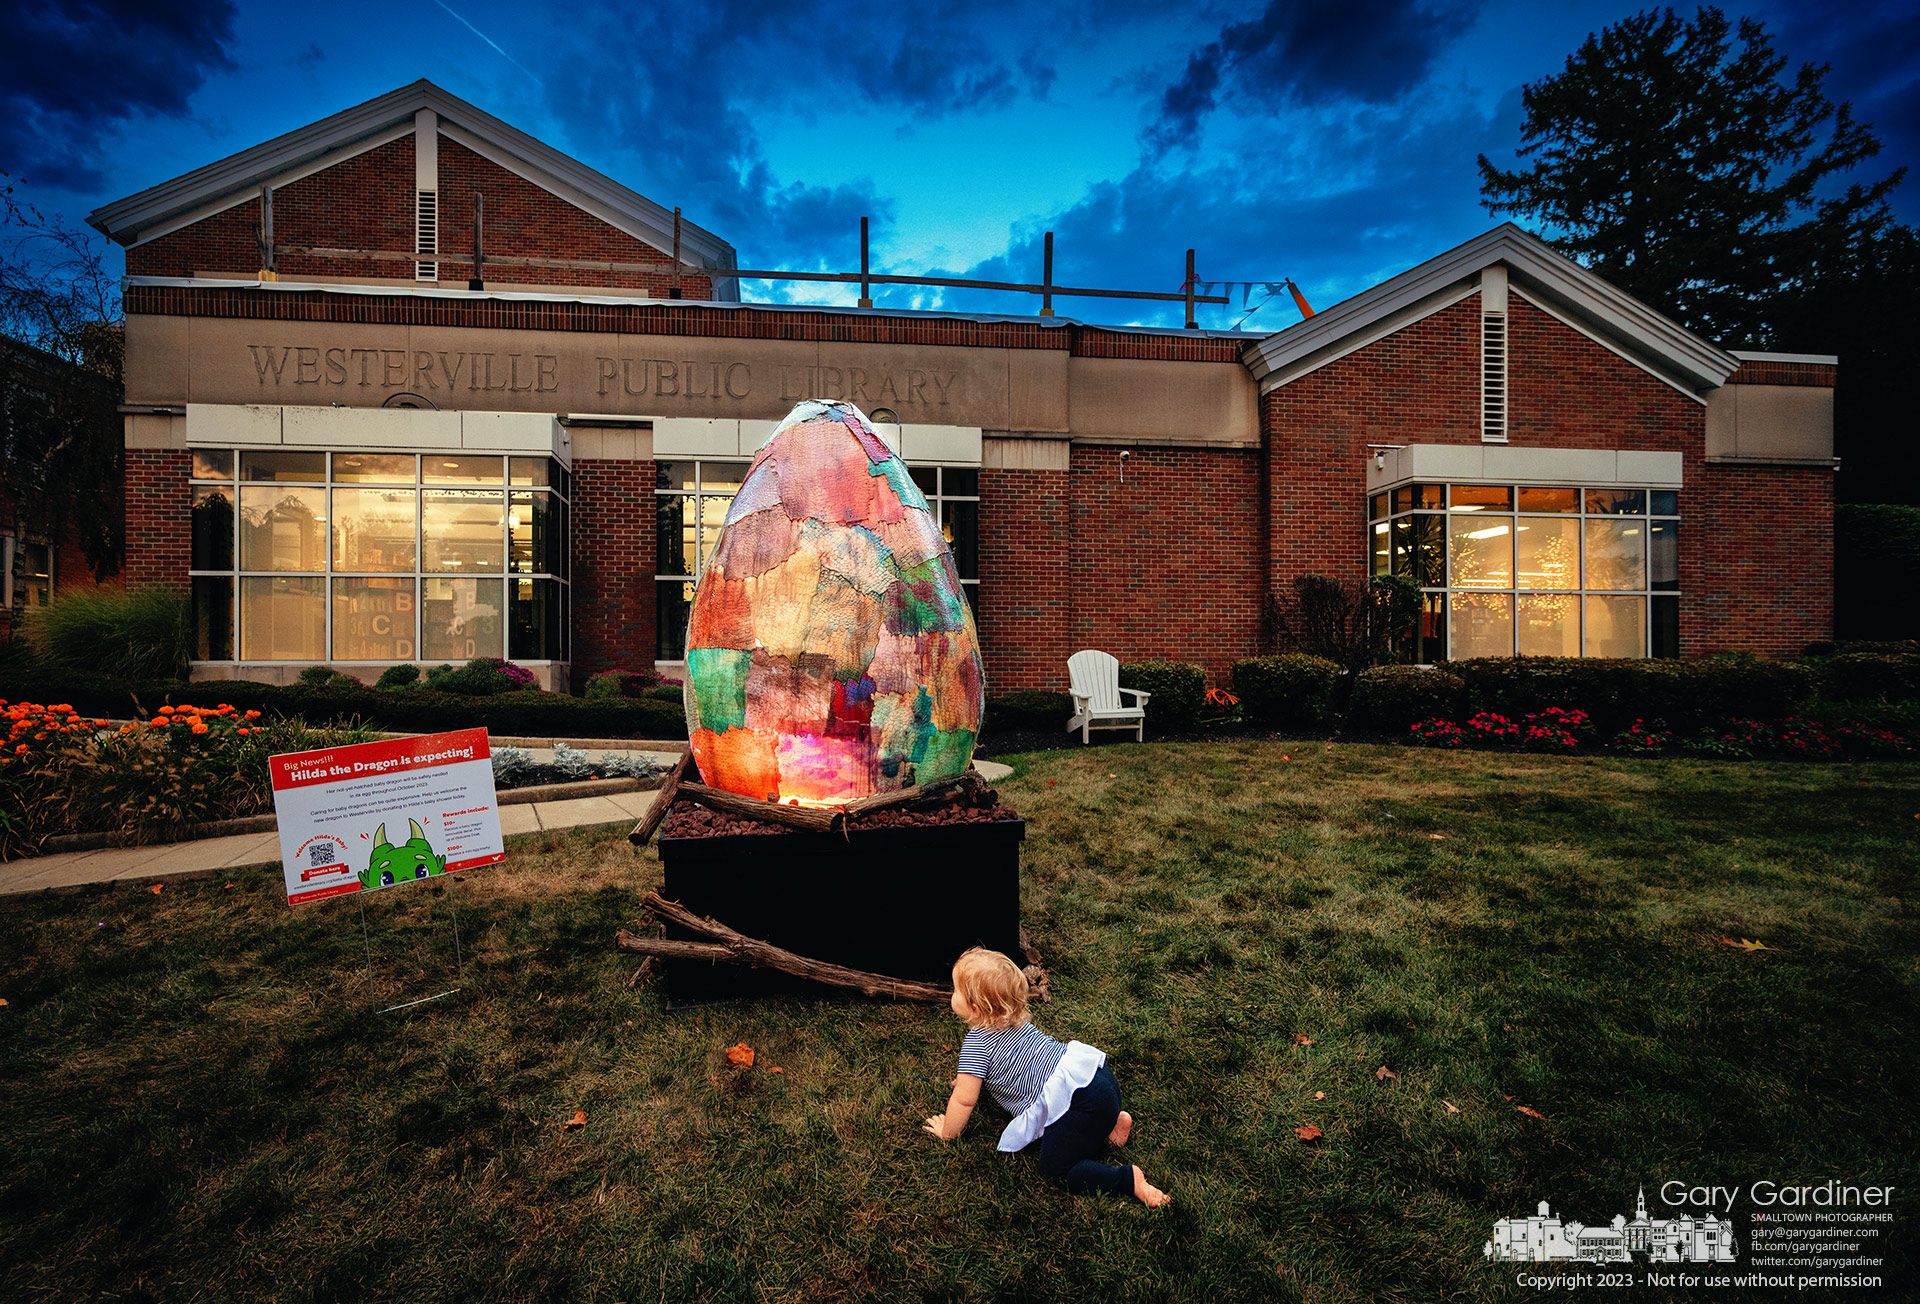 A toddler crawls her way to the glowing Hilda the Dragon egg decorating the front lawn of the Westerville Public Library for Wizards and Wands in October. My Final Photo for October 4, 2023.